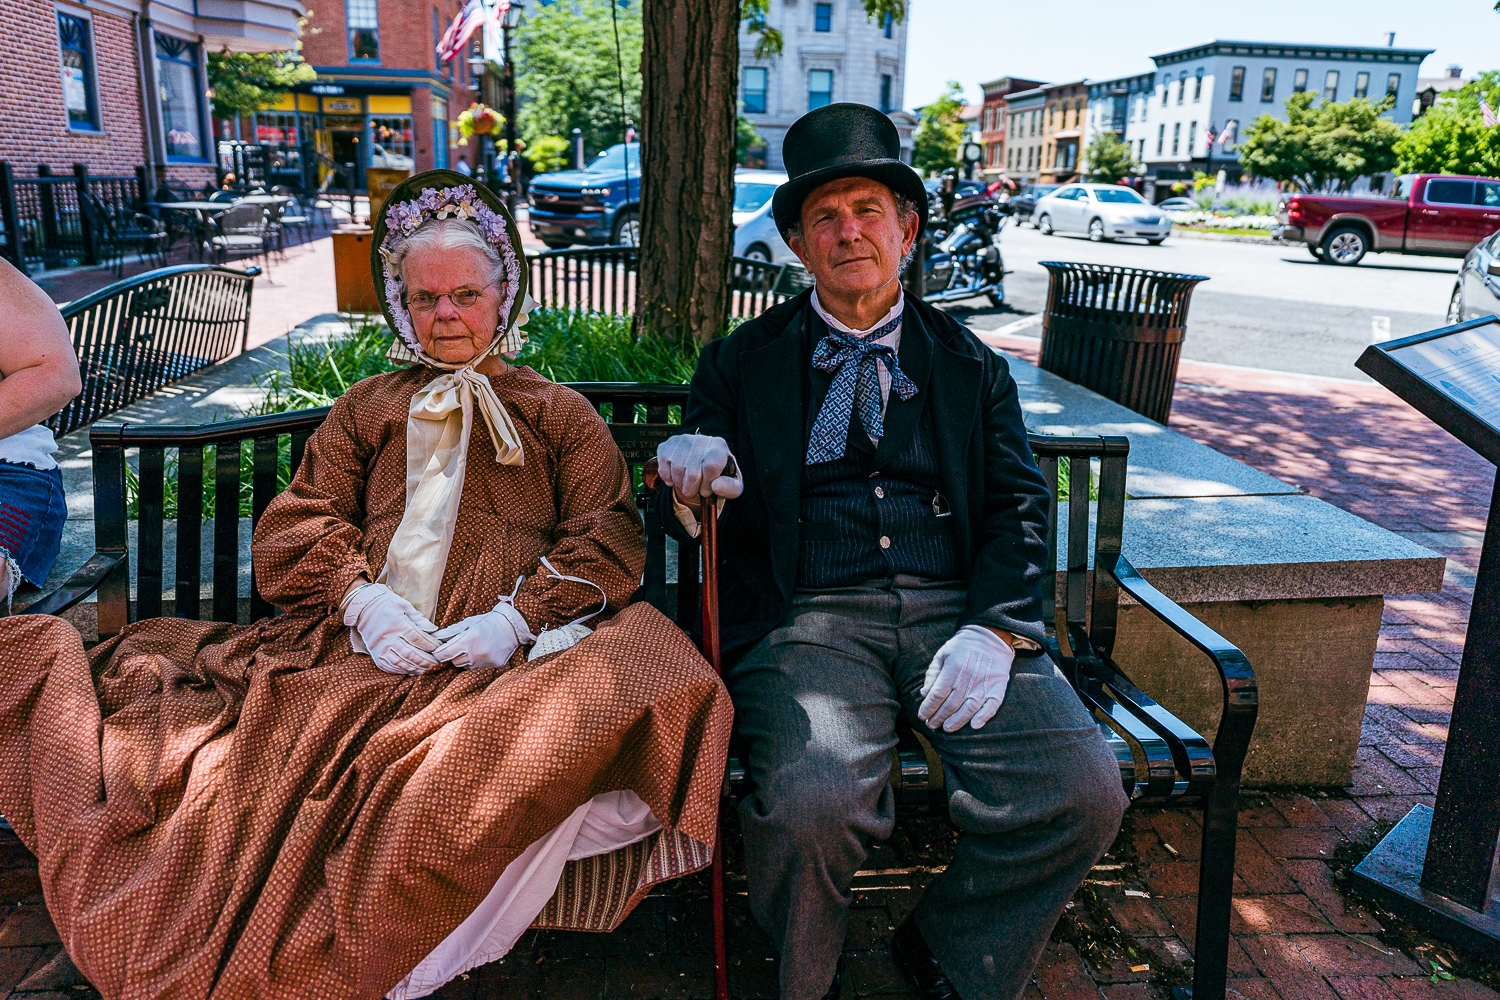 Gettysburg, PA, USA – July 3, 2022: A pair of historical reenactors sit in the shade in the downtown square in period clothing over the July 4th celebration in Adams County, PA.